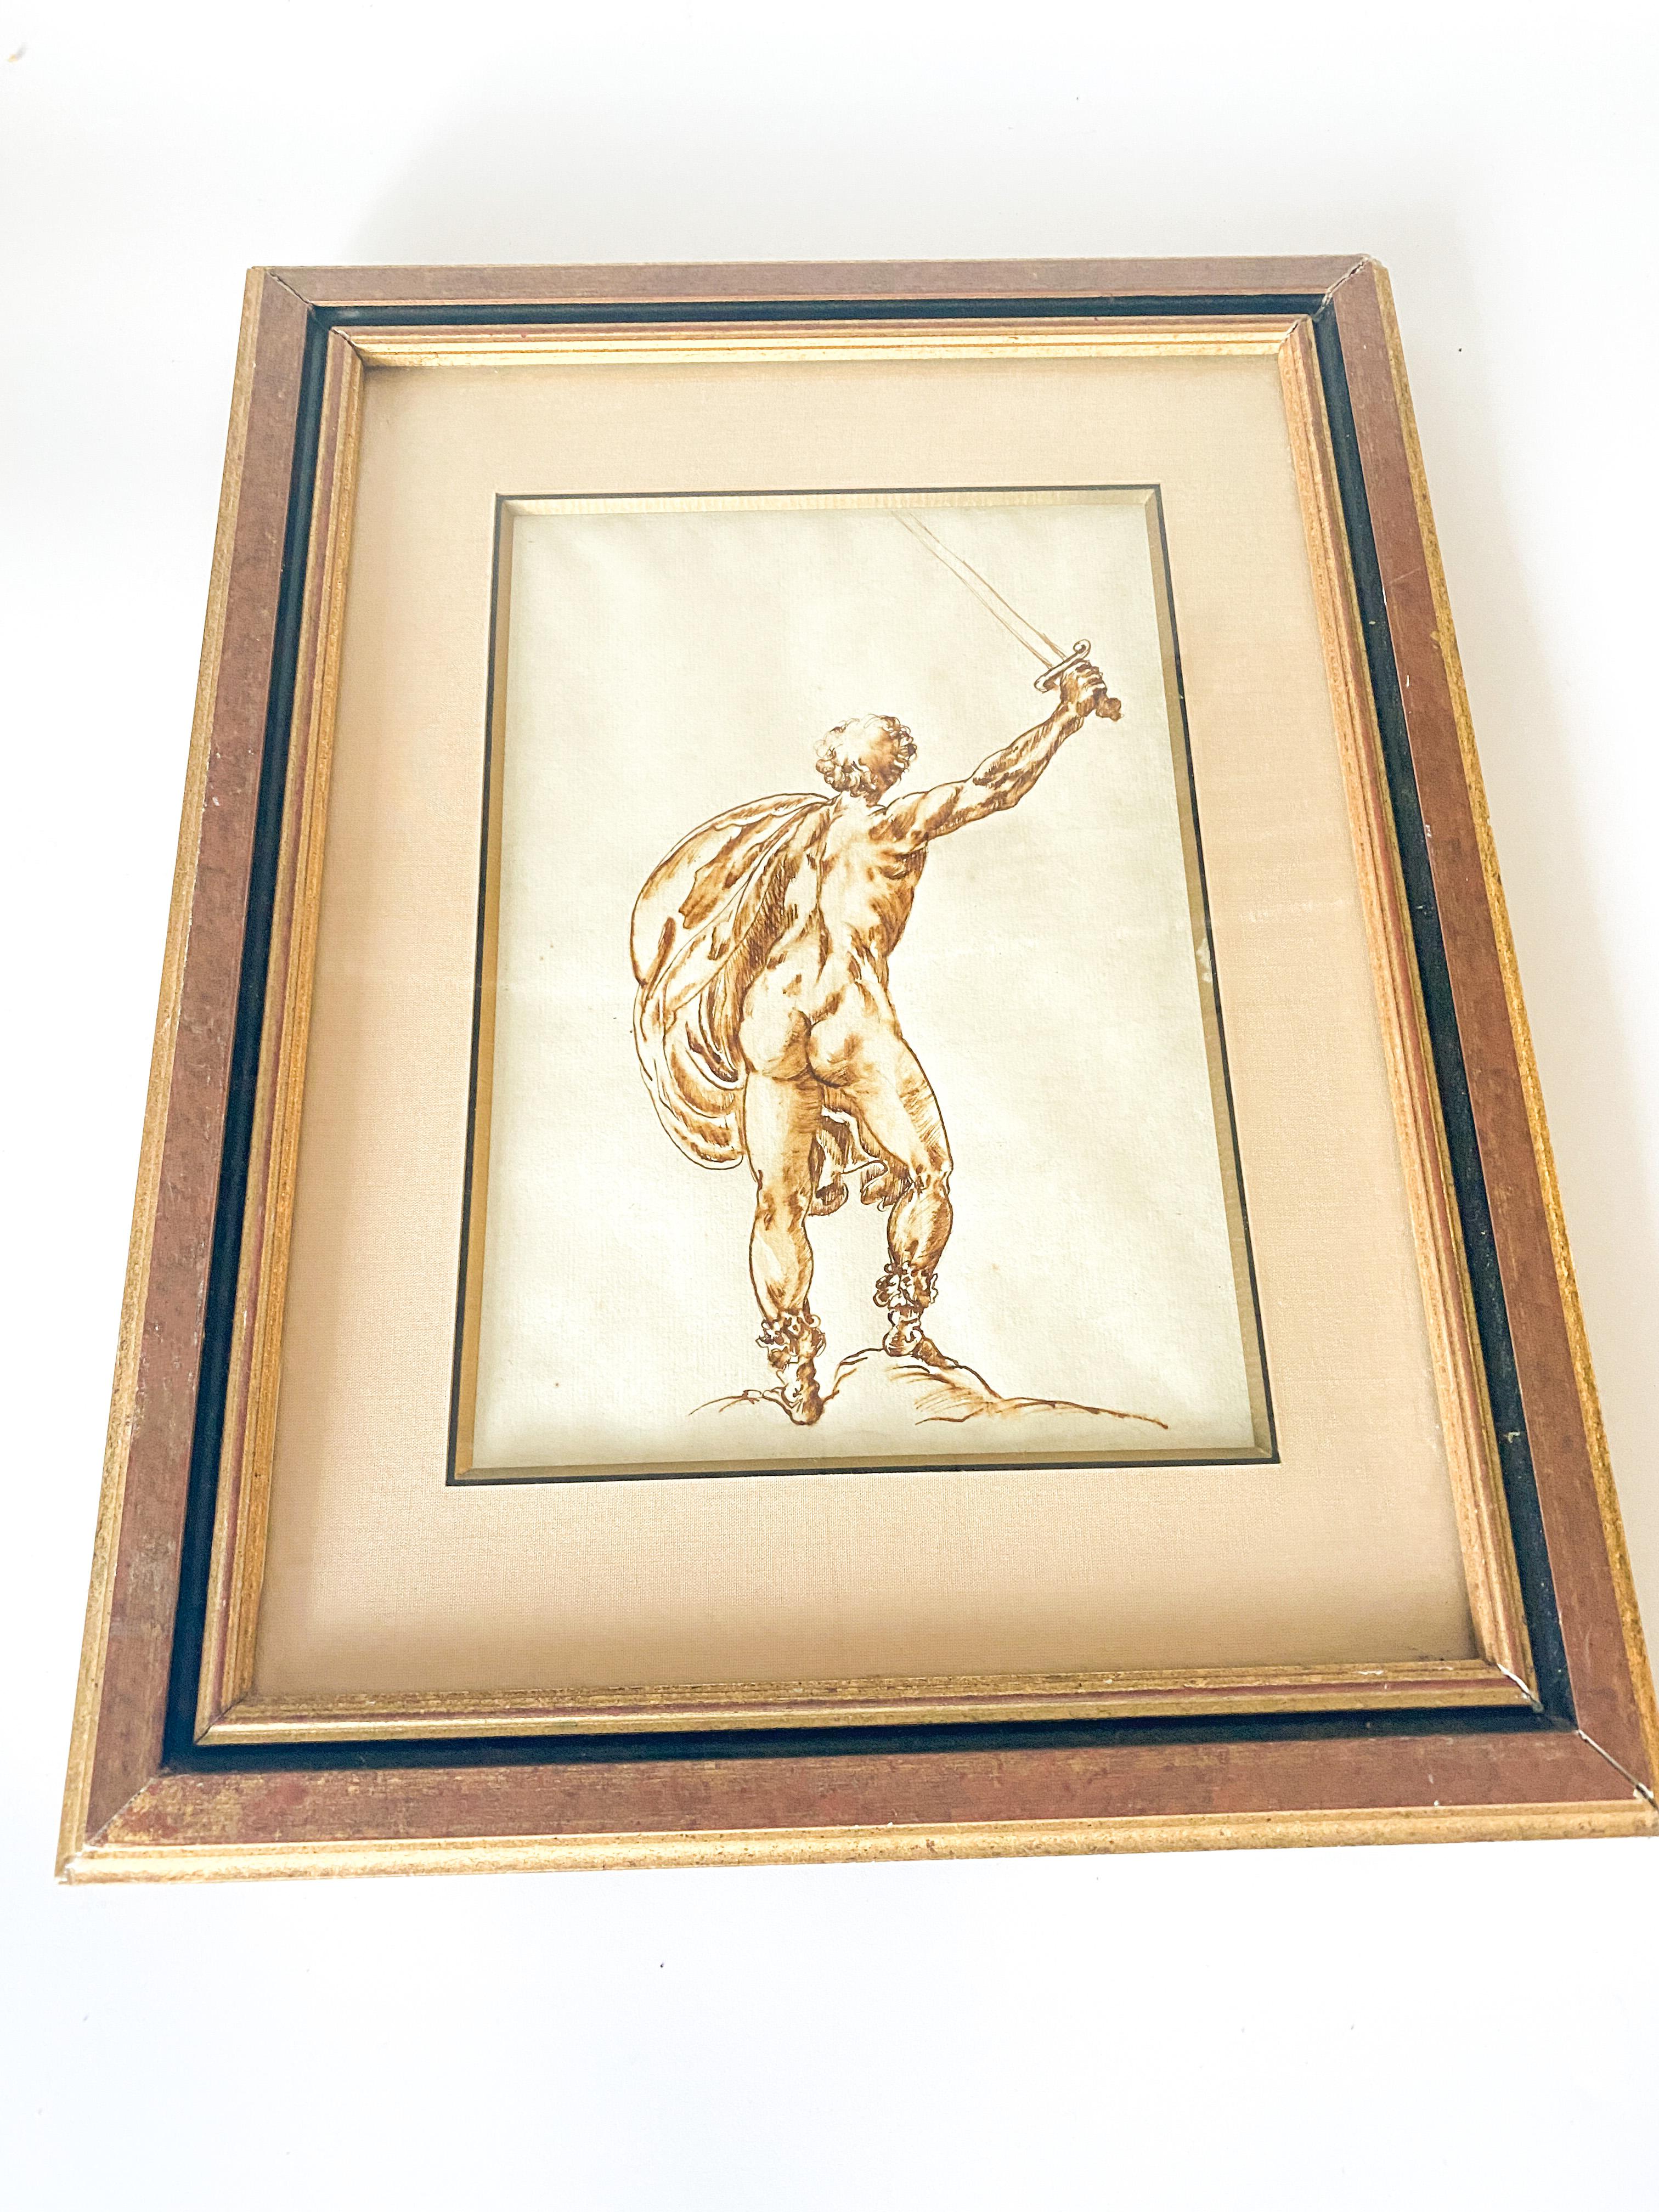 This is an engraving of an Ink drawing, in a brown color. It has been made in France during the 19th century.